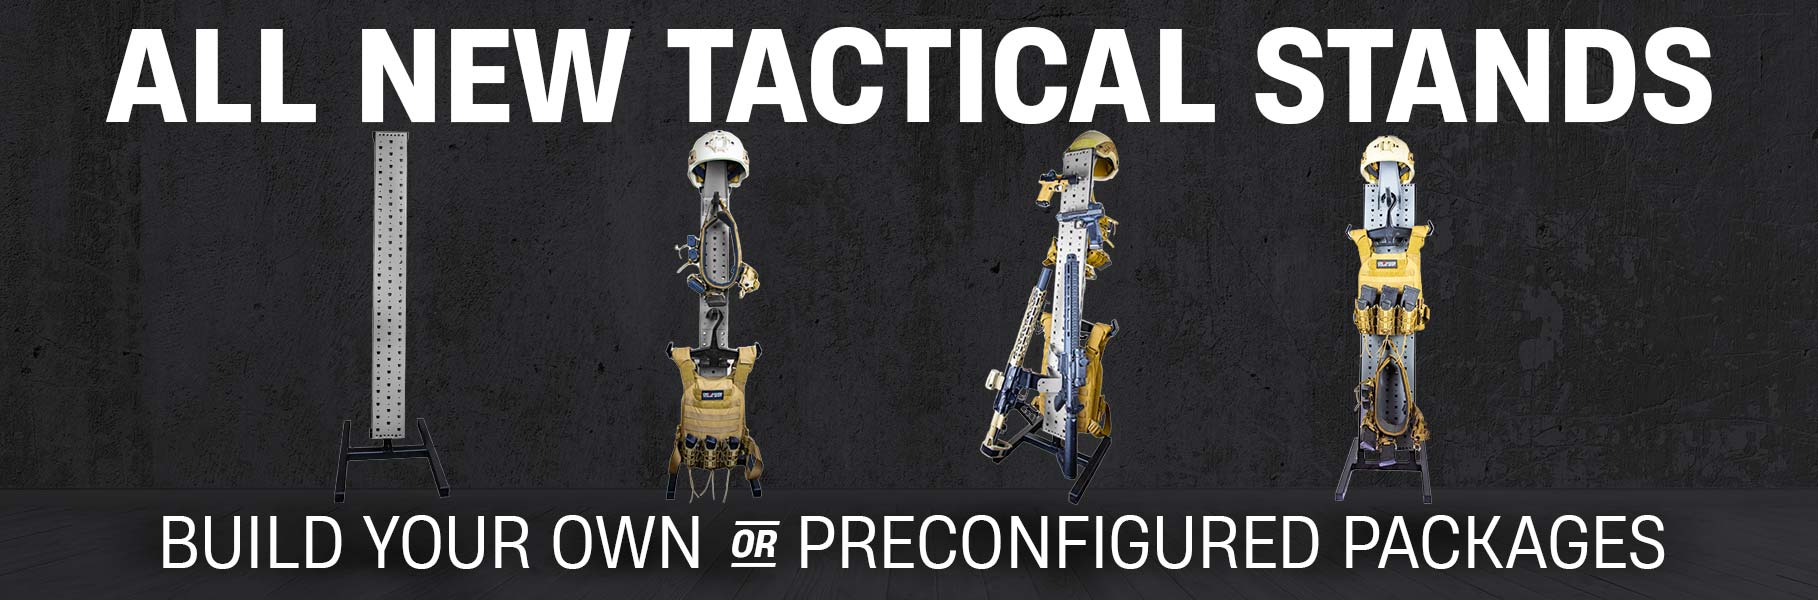 All New Tactical Stand Packages